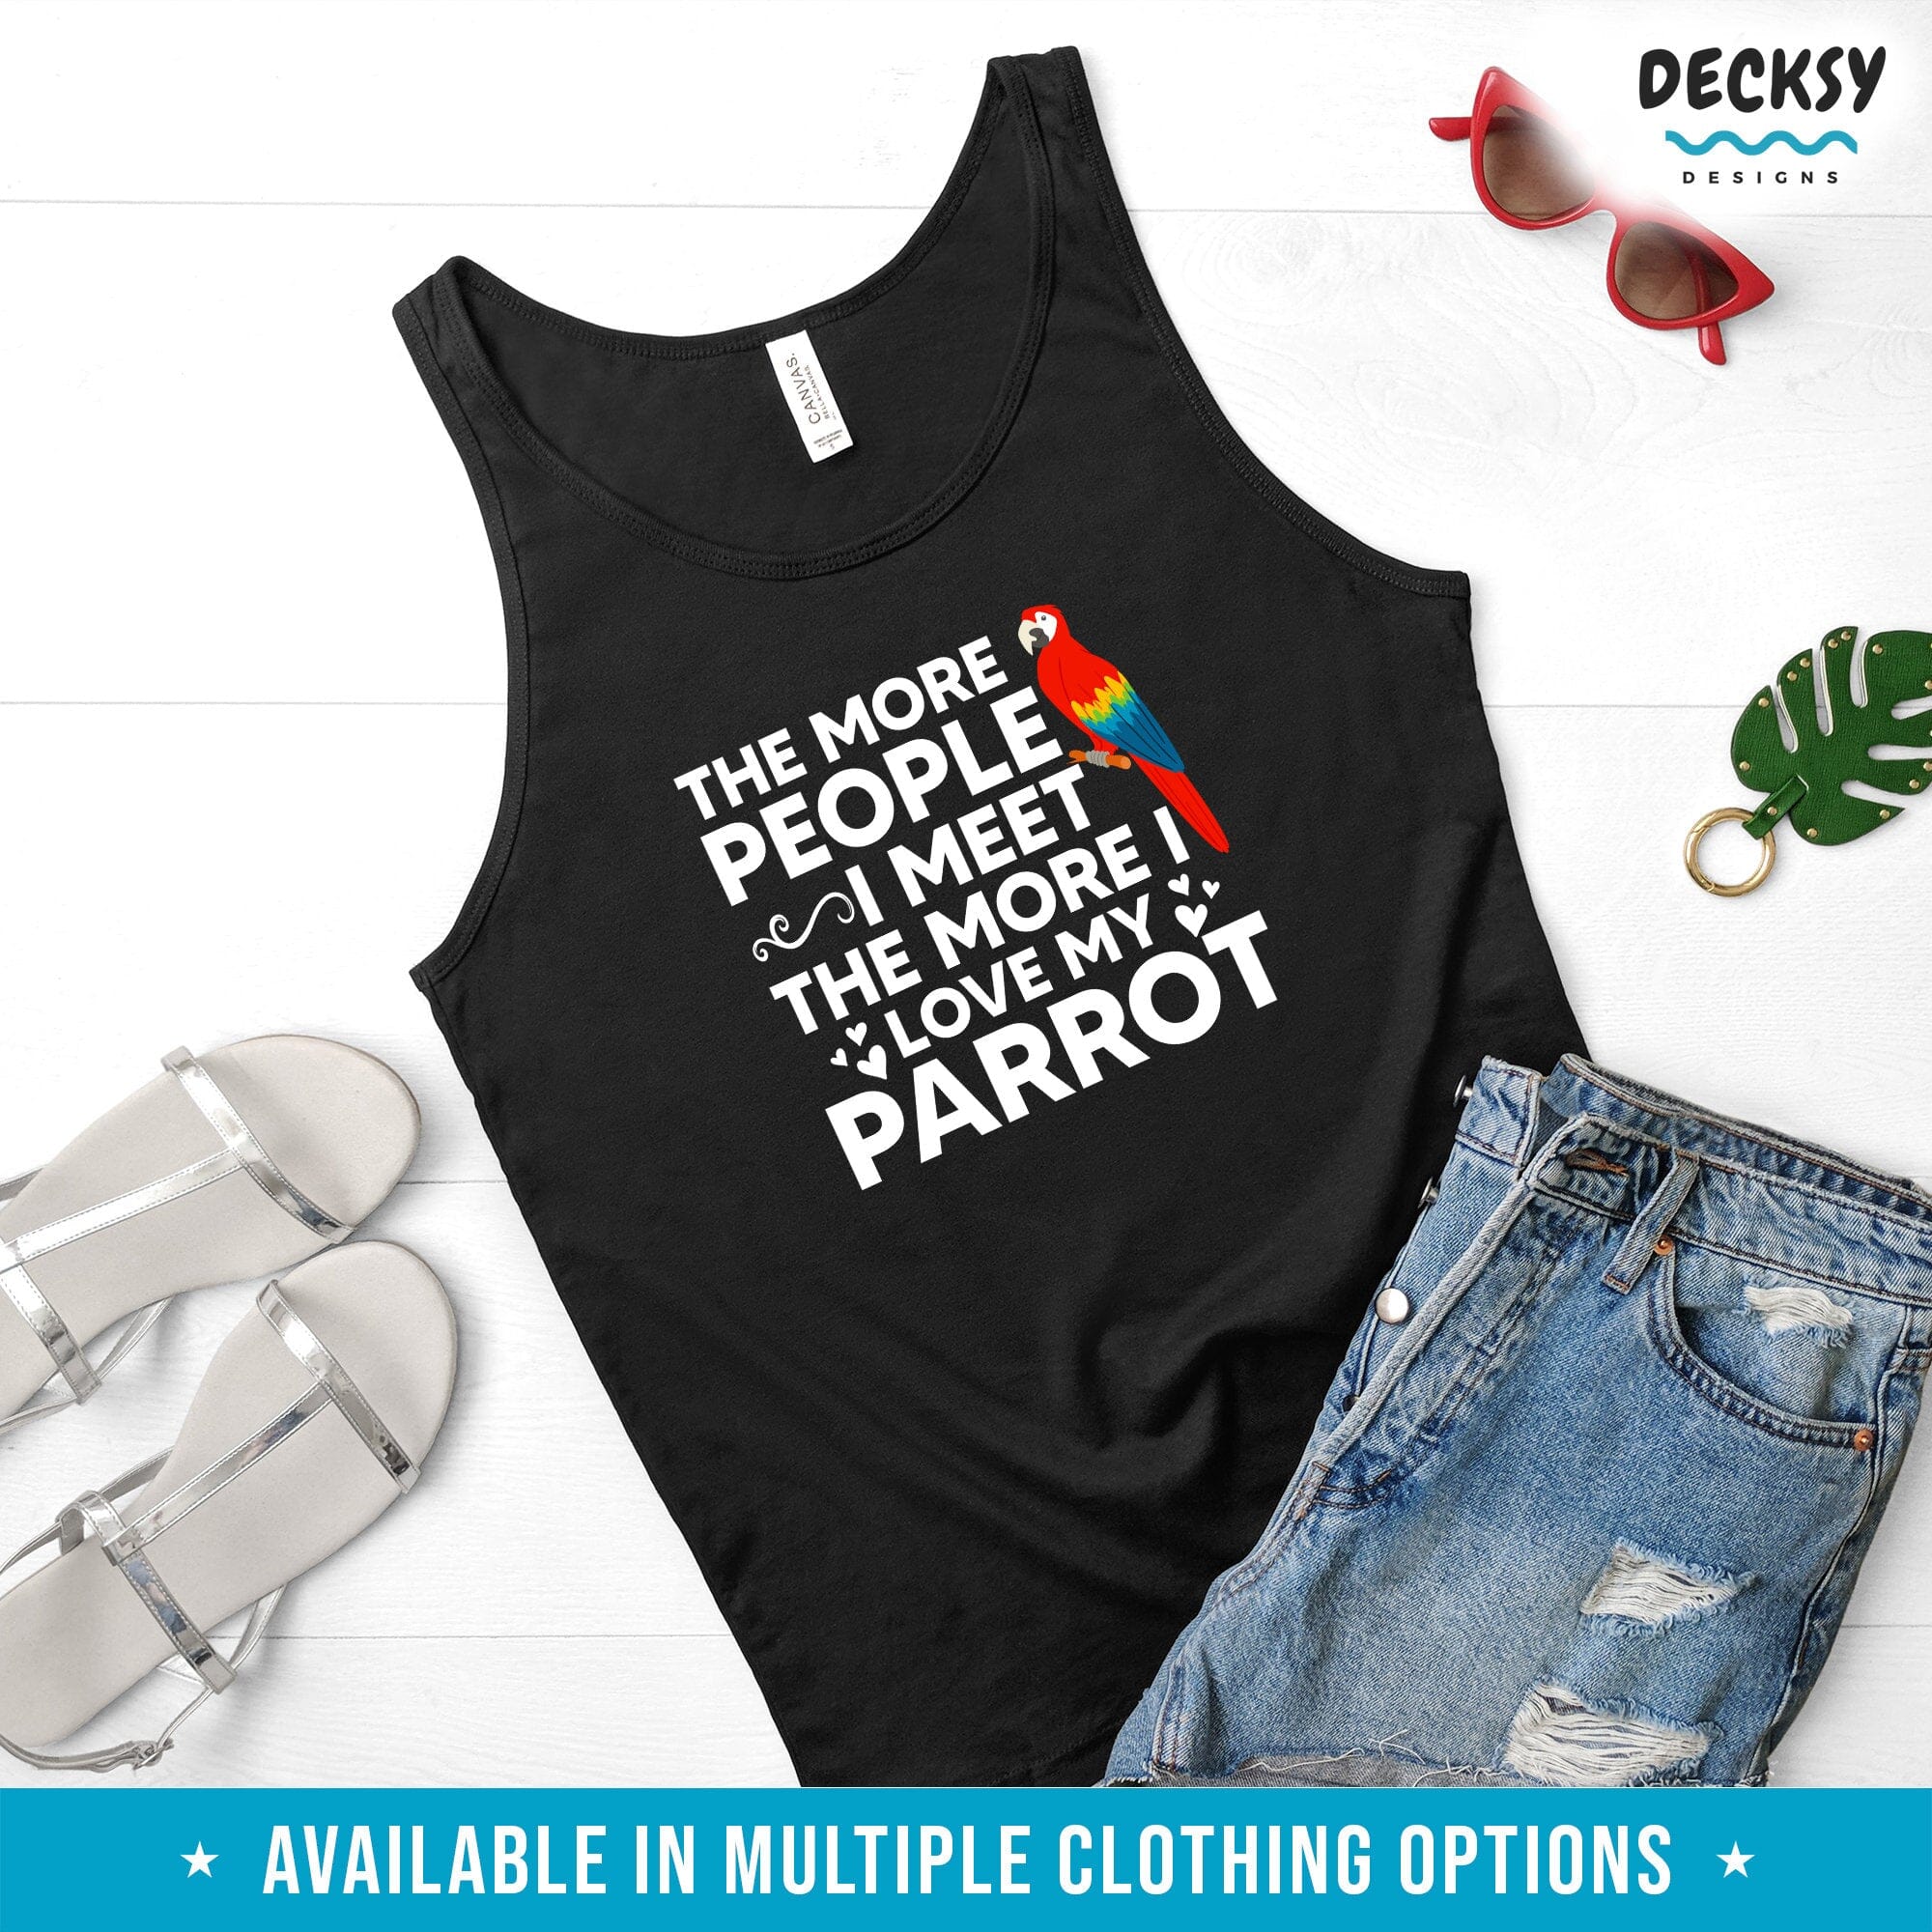 Macaw Parrot Shirt, Bird Lover Gift-Clothing:Gender-Neutral Adult Clothing:Tops & Tees:T-shirts:Graphic Tees-DecksyDesigns